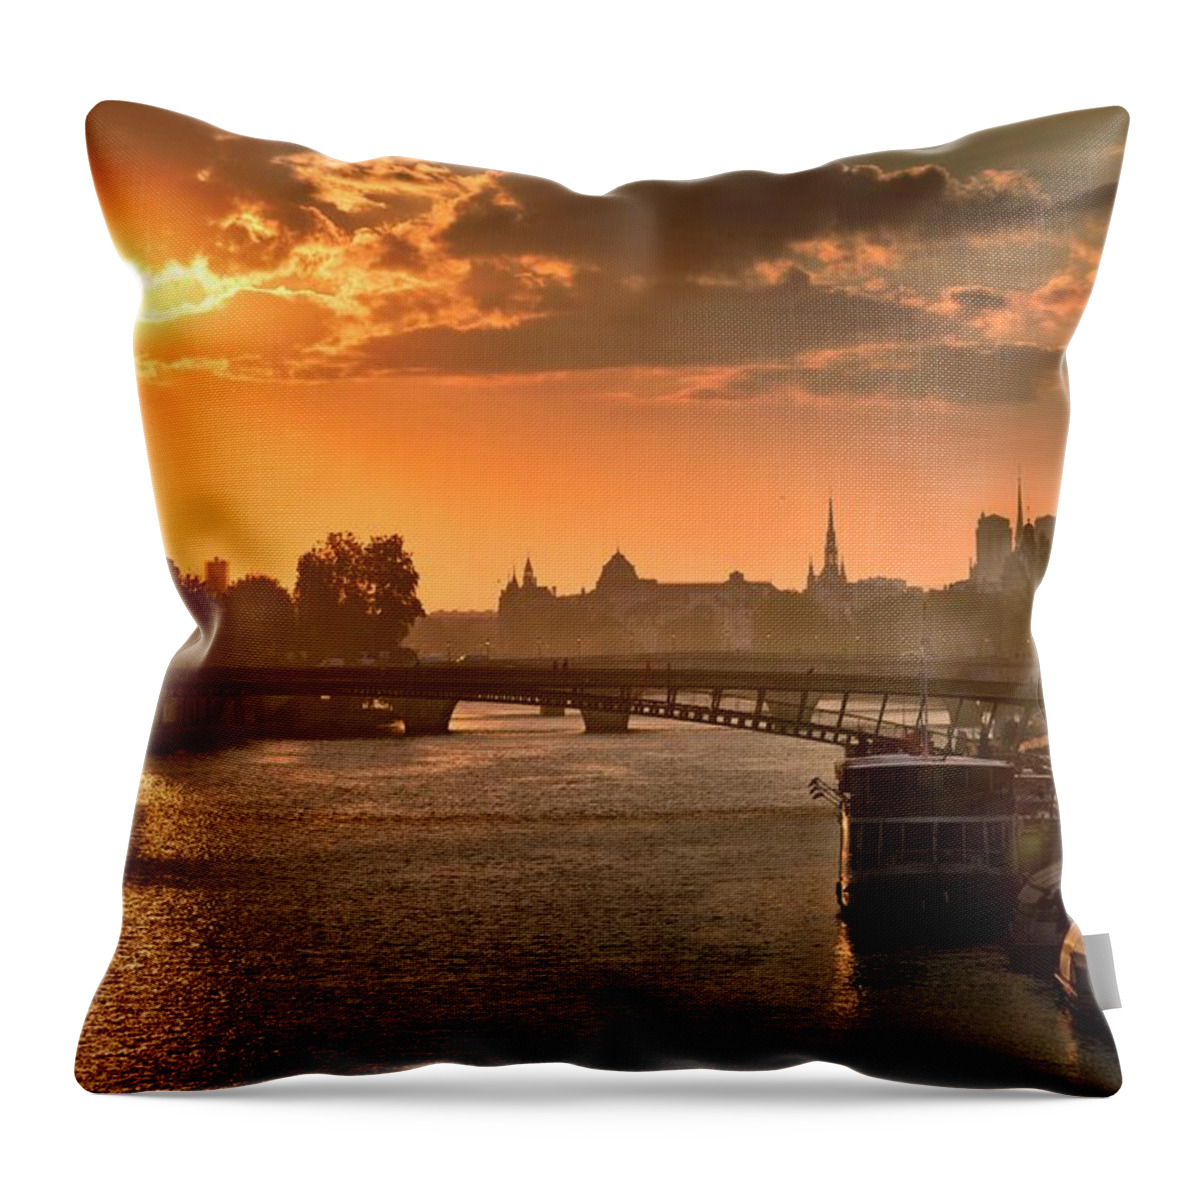 Estock Throw Pillow featuring the digital art City Of Paris With Seine River by Massimo Ripani